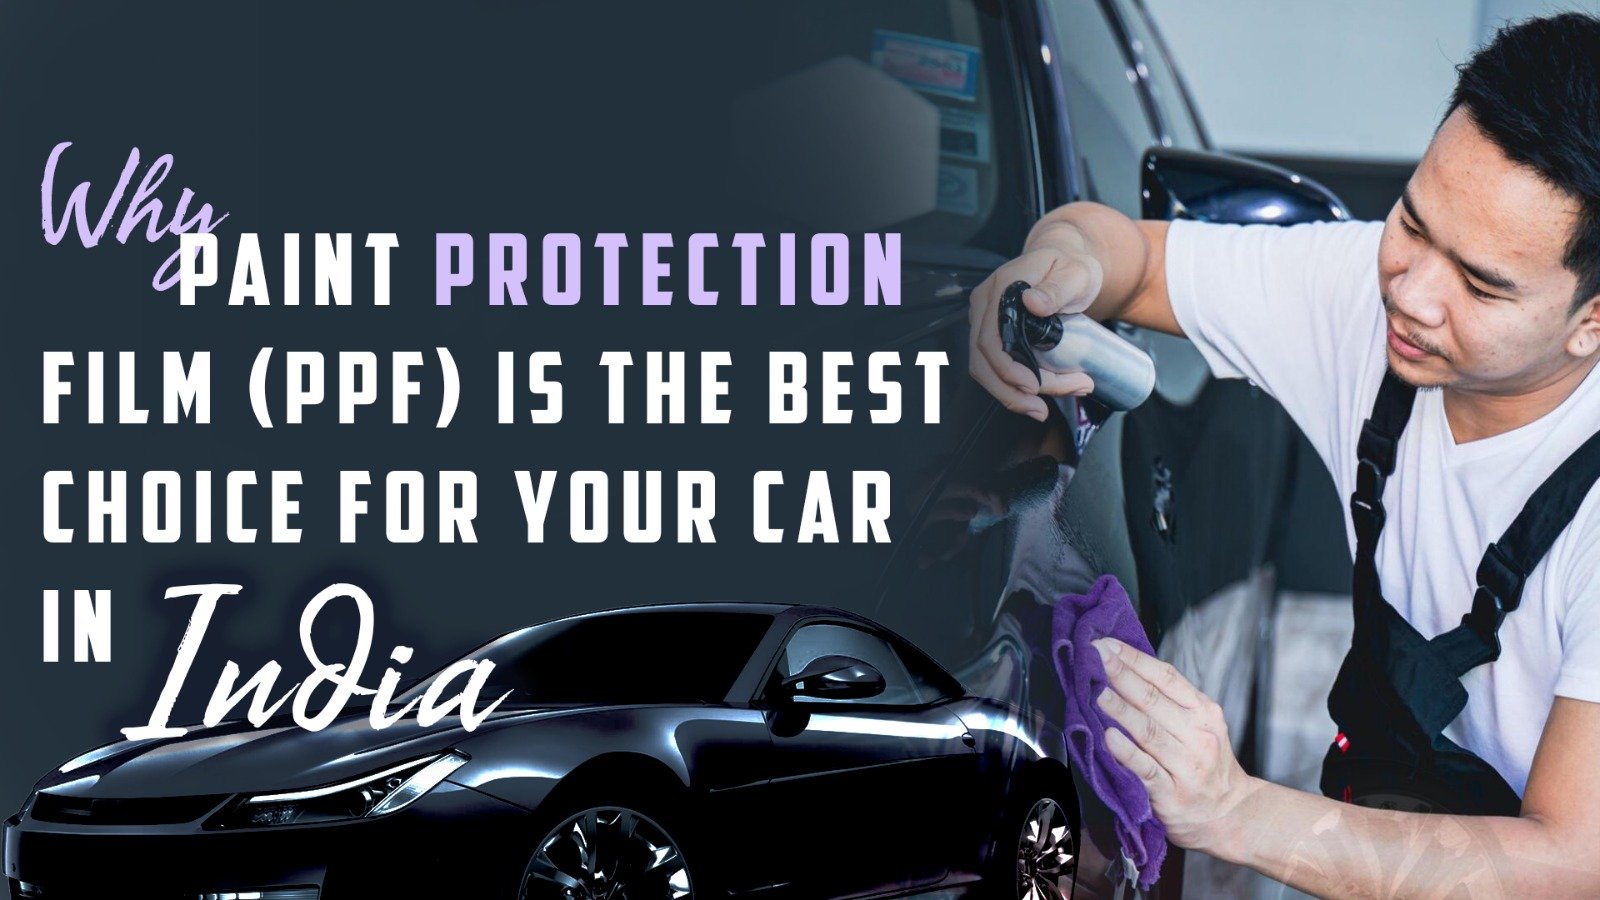 Unraveling the Magic of Self-Healing Paint Protection Film (PPF)